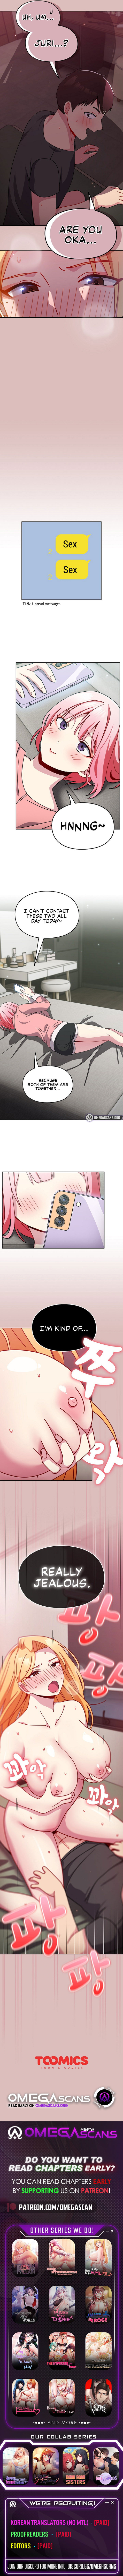 when-did-we-start-dating-chap-38-6